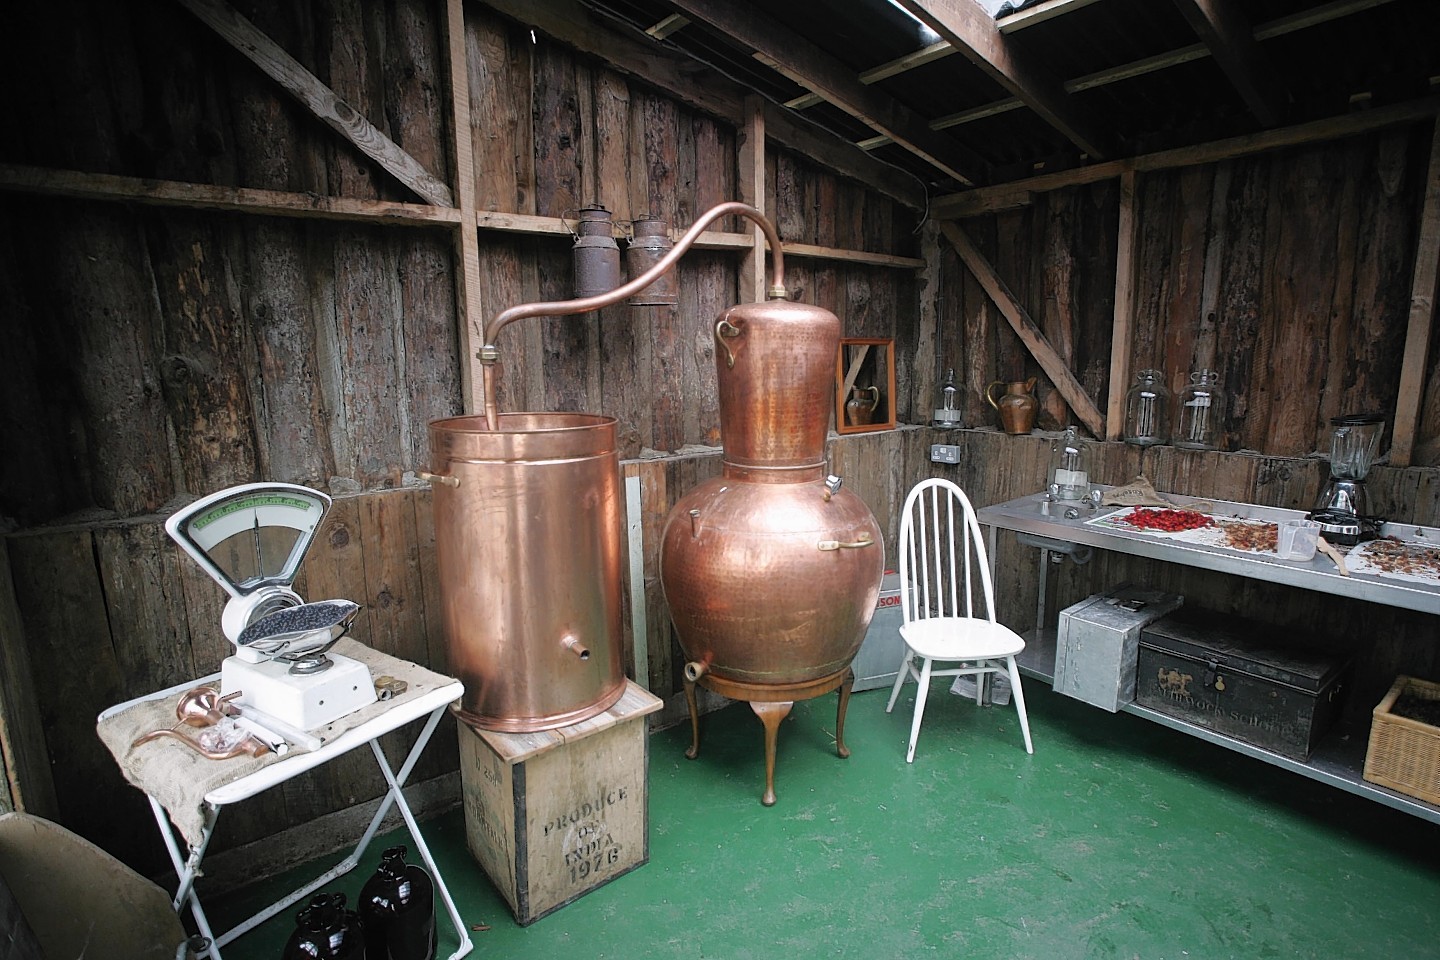 The shed at Inshriach owned by Walter Micklethwait has been named a winner in the Shed of the Year contest is also a gin distillery